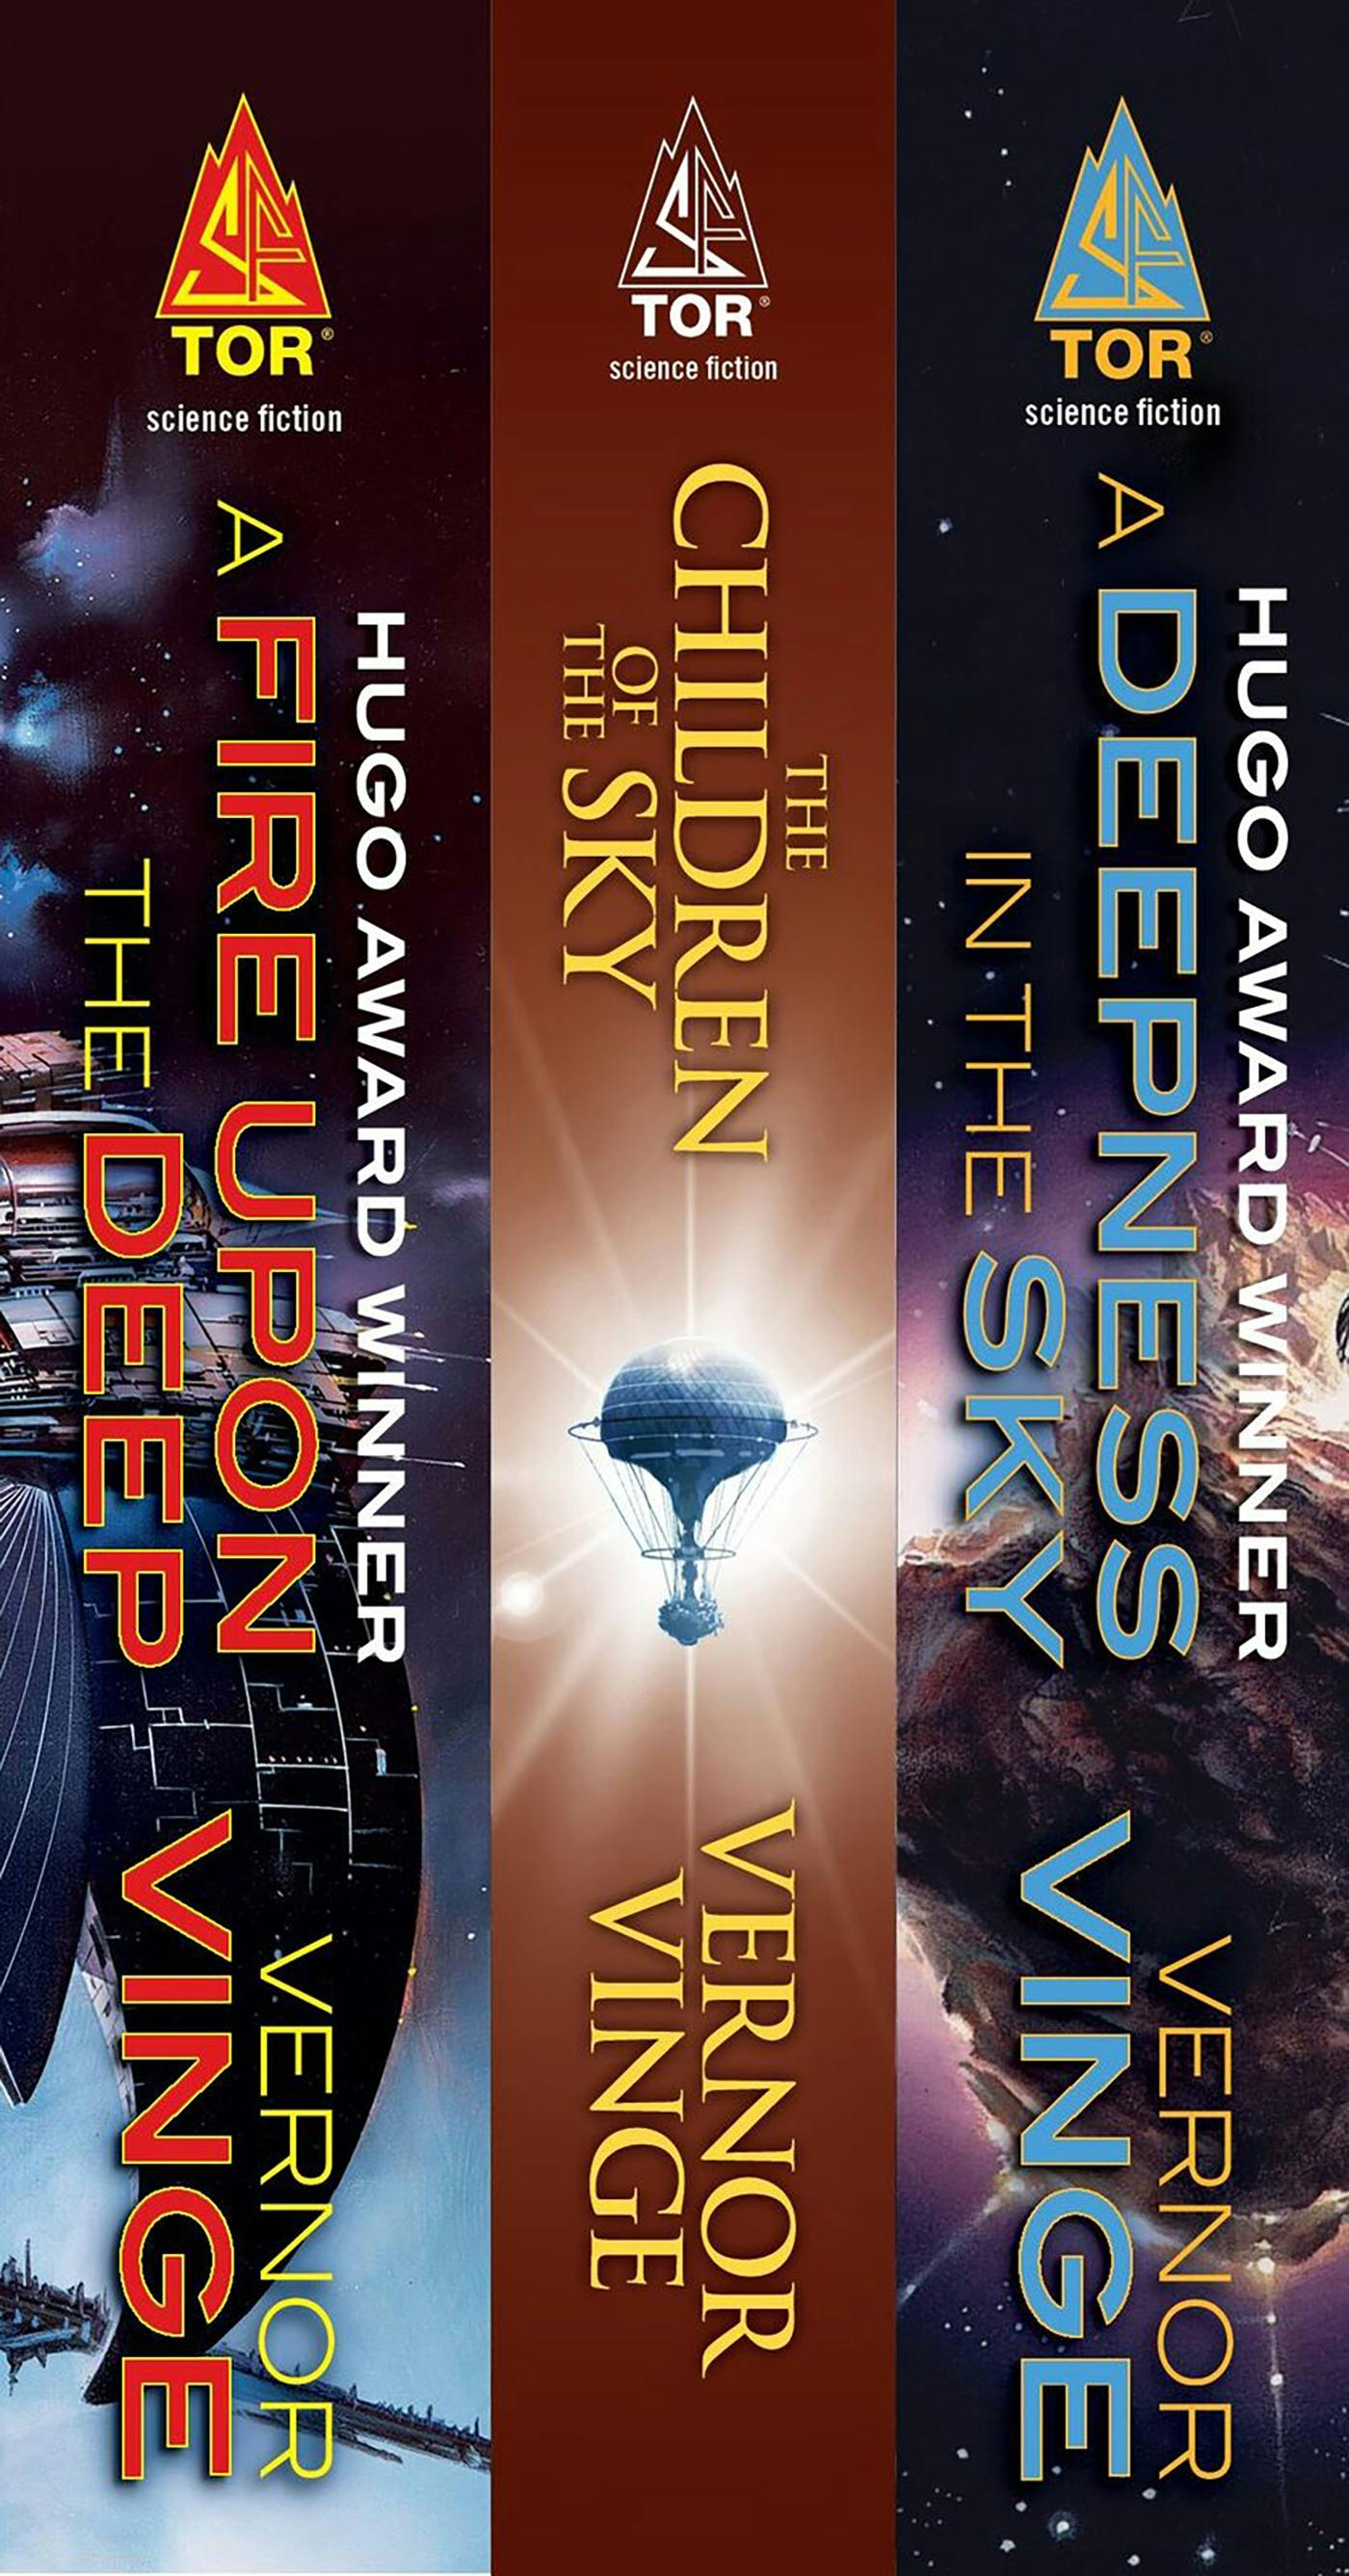 Vernor Vinge: a SciFi prophet due for re-discovery of his books and  predictions about VR